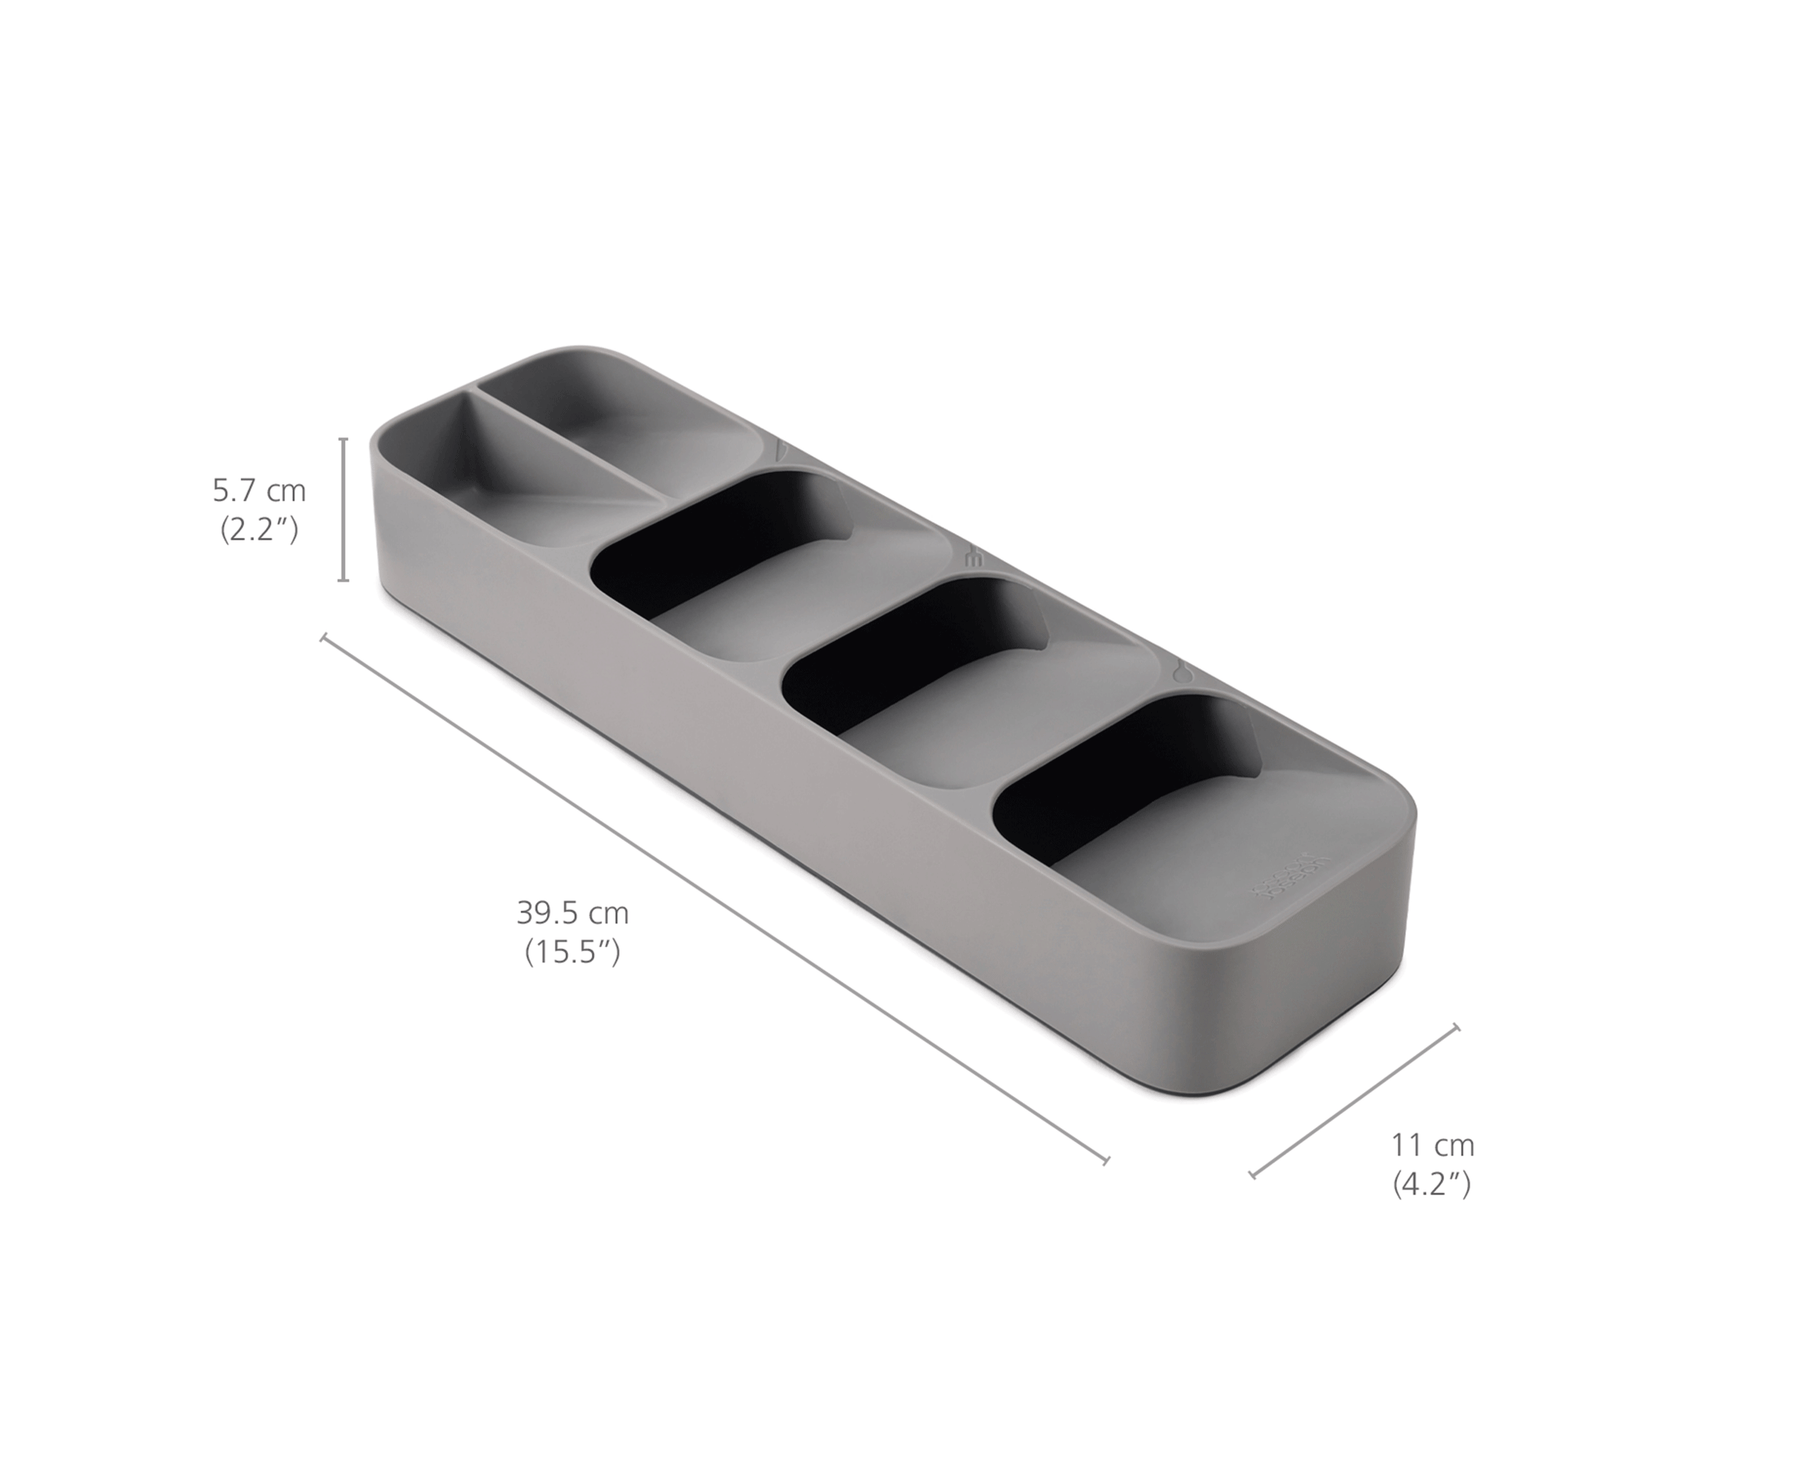 DrawerStore™ Compact Cutlery Organiser - Editions - Image 4